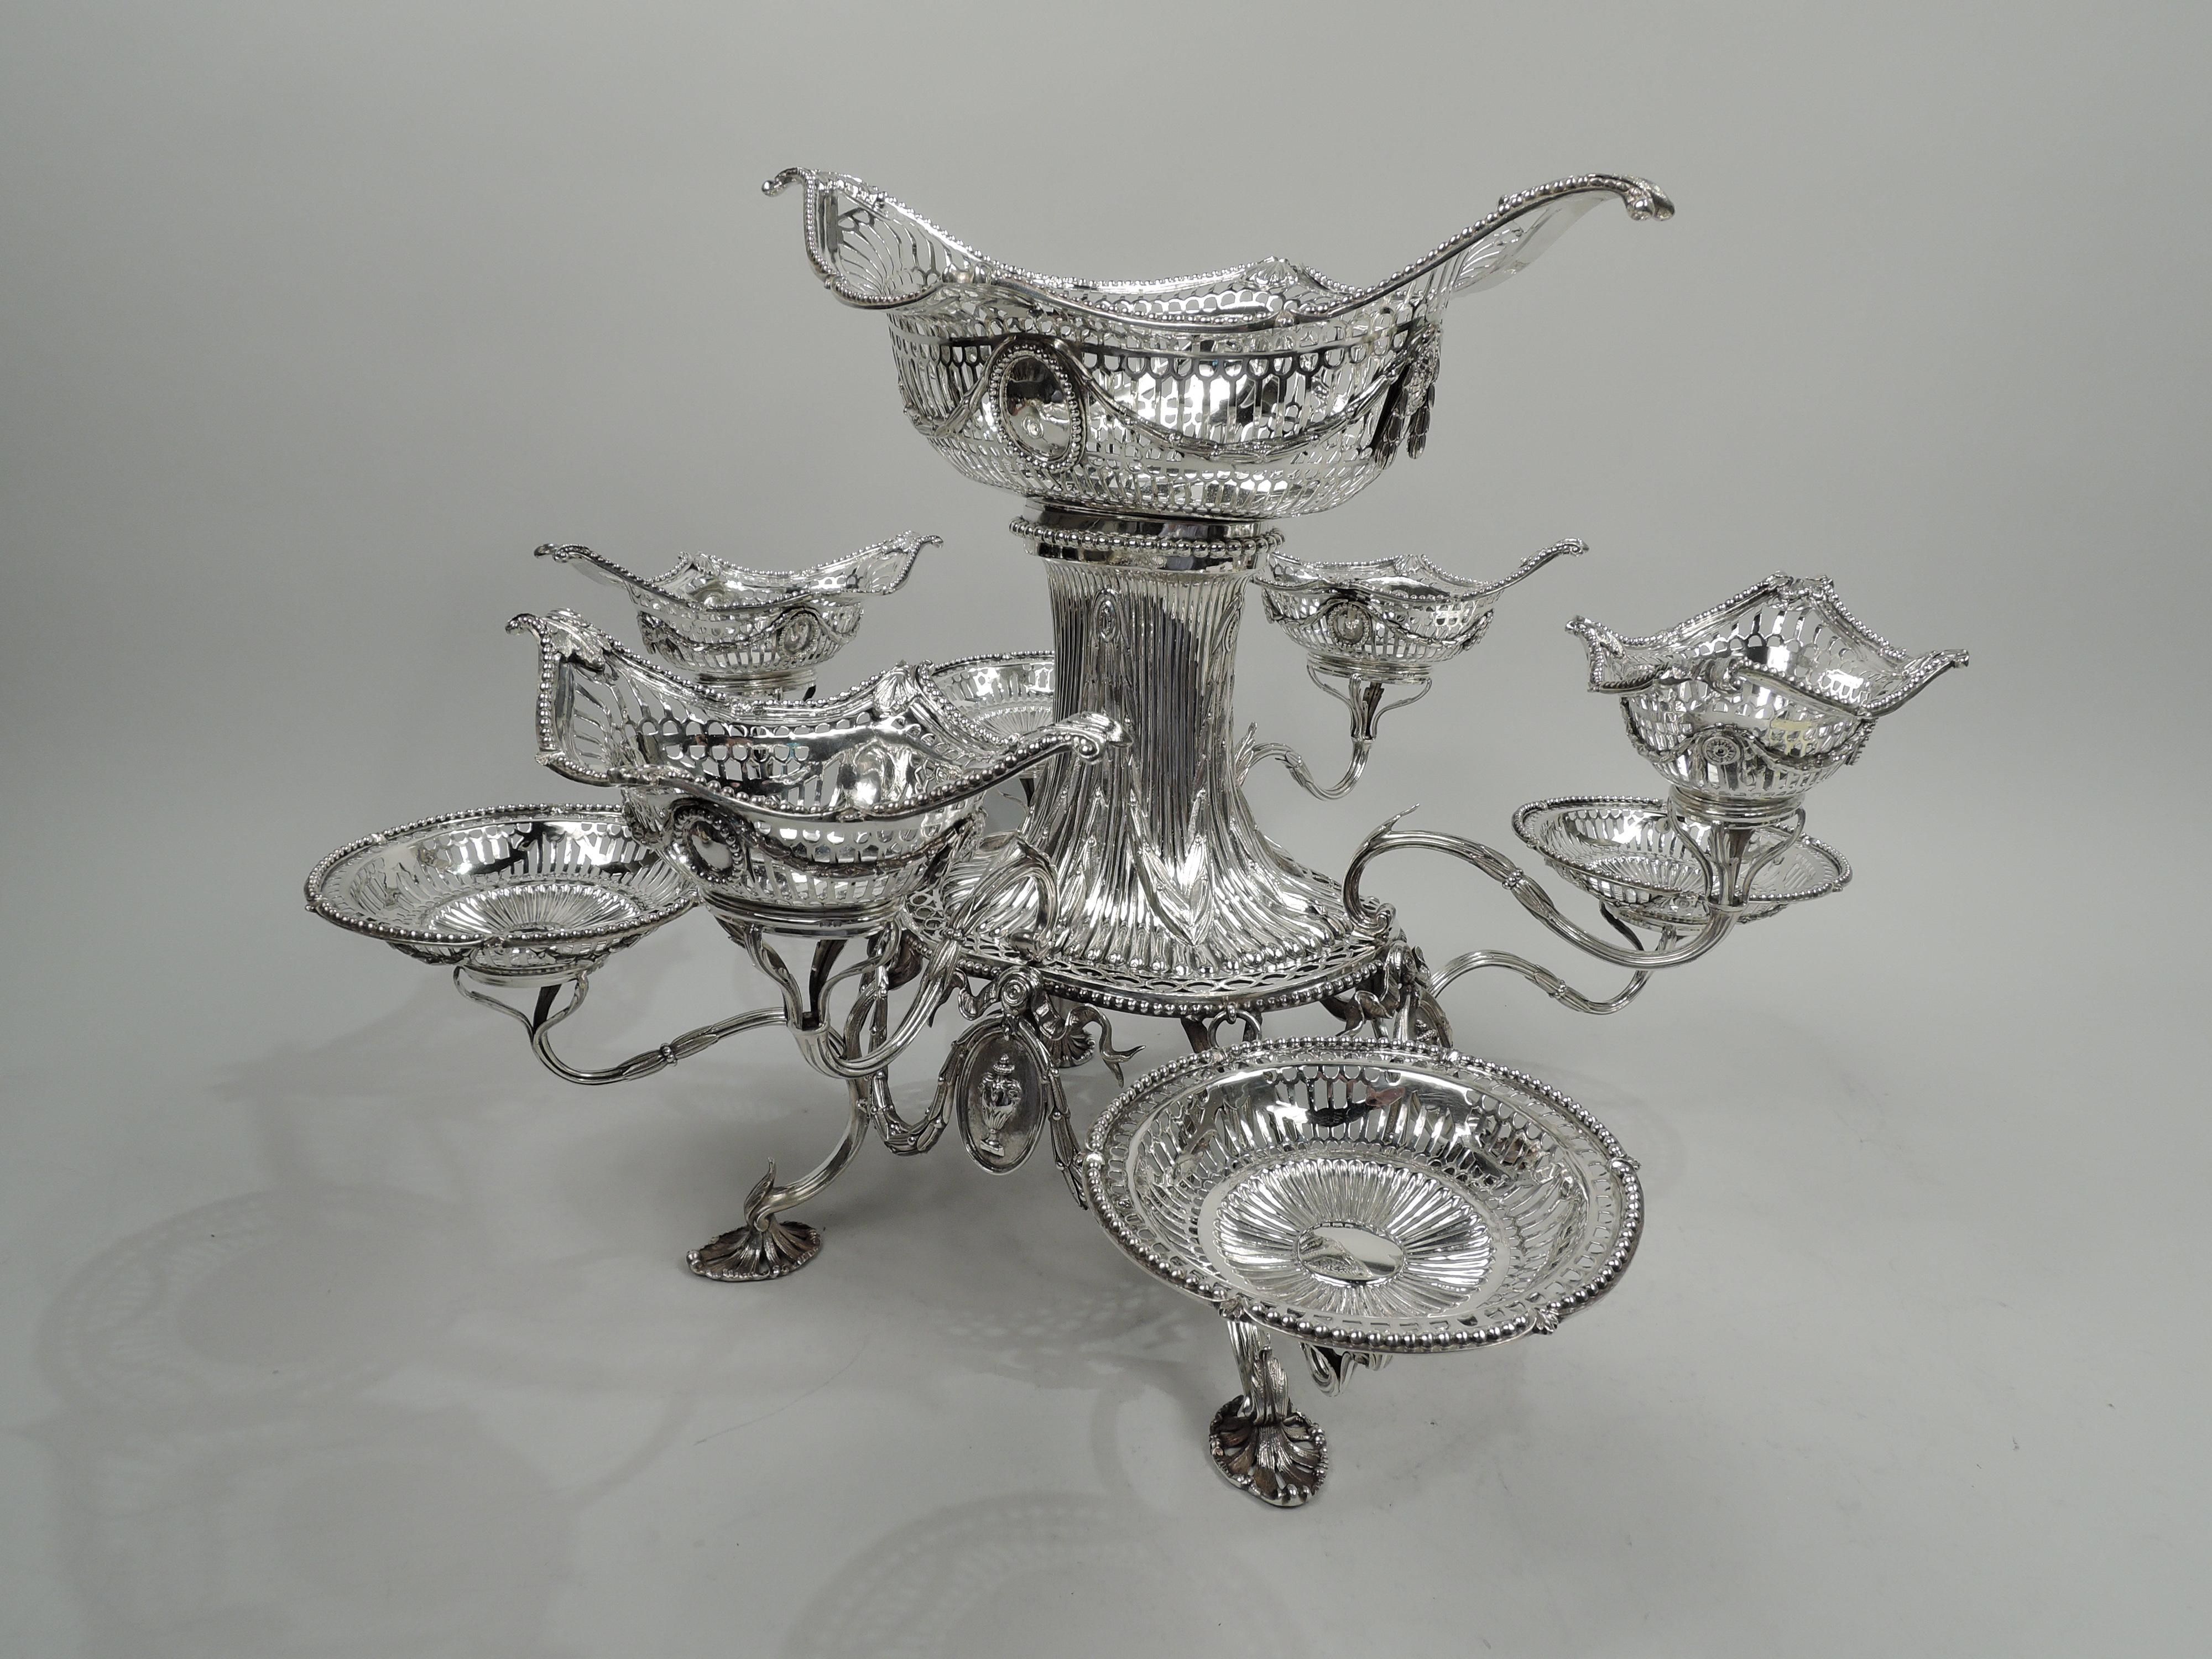 Neoclassical Revival Antique English Victorian Neoclassical Sterling Silver Epergne For Sale